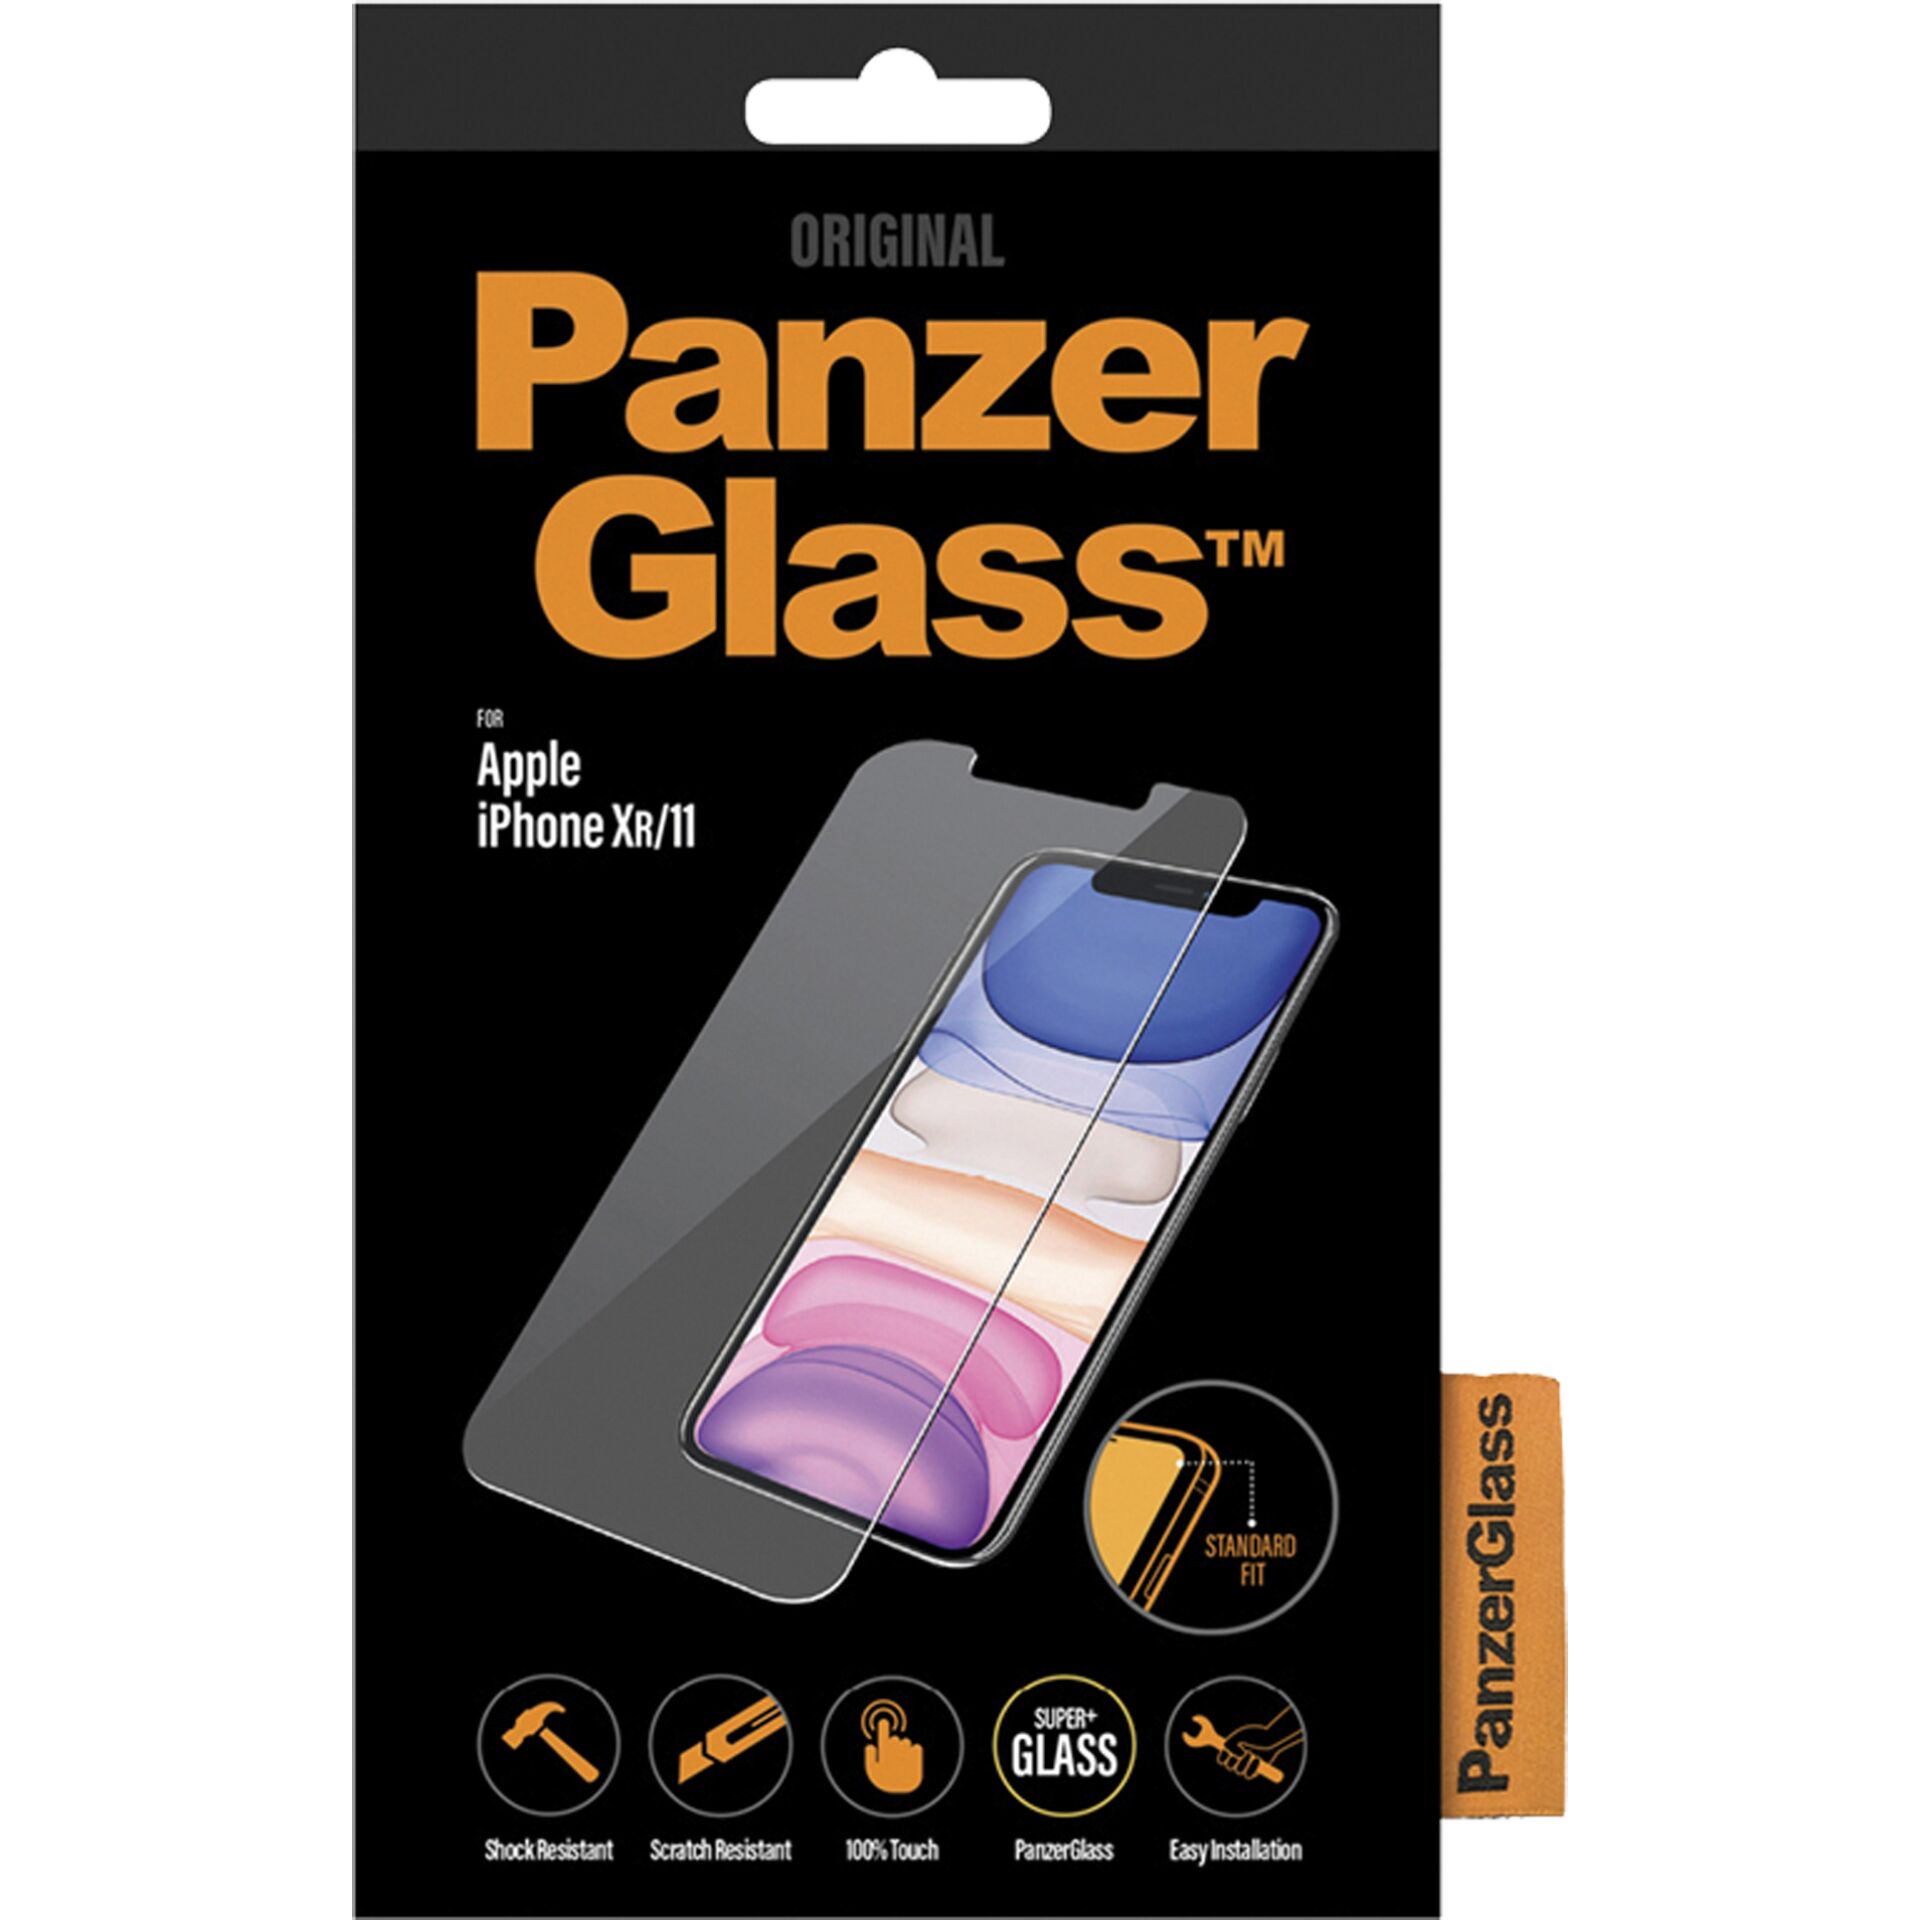 PanzerGlass Screen Protector for iPhone 11 / XR